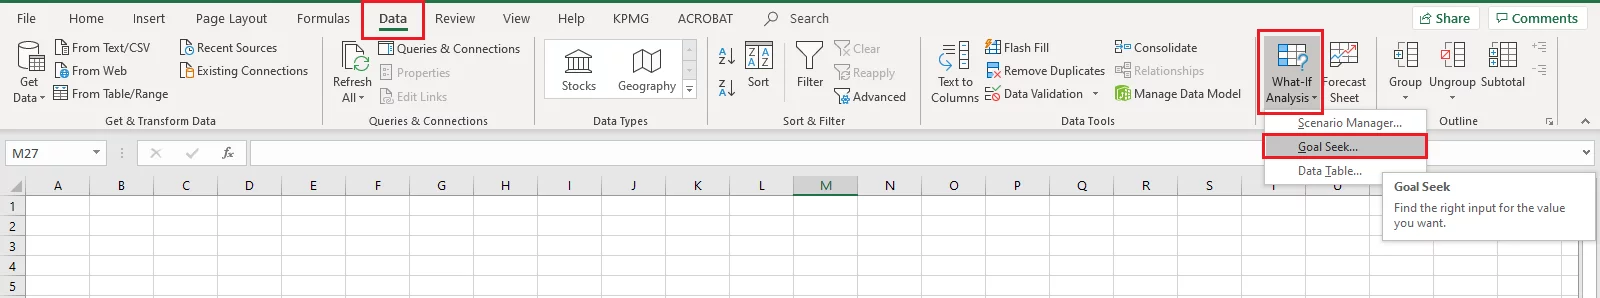 Accessing the Goal Seek feature in Excel